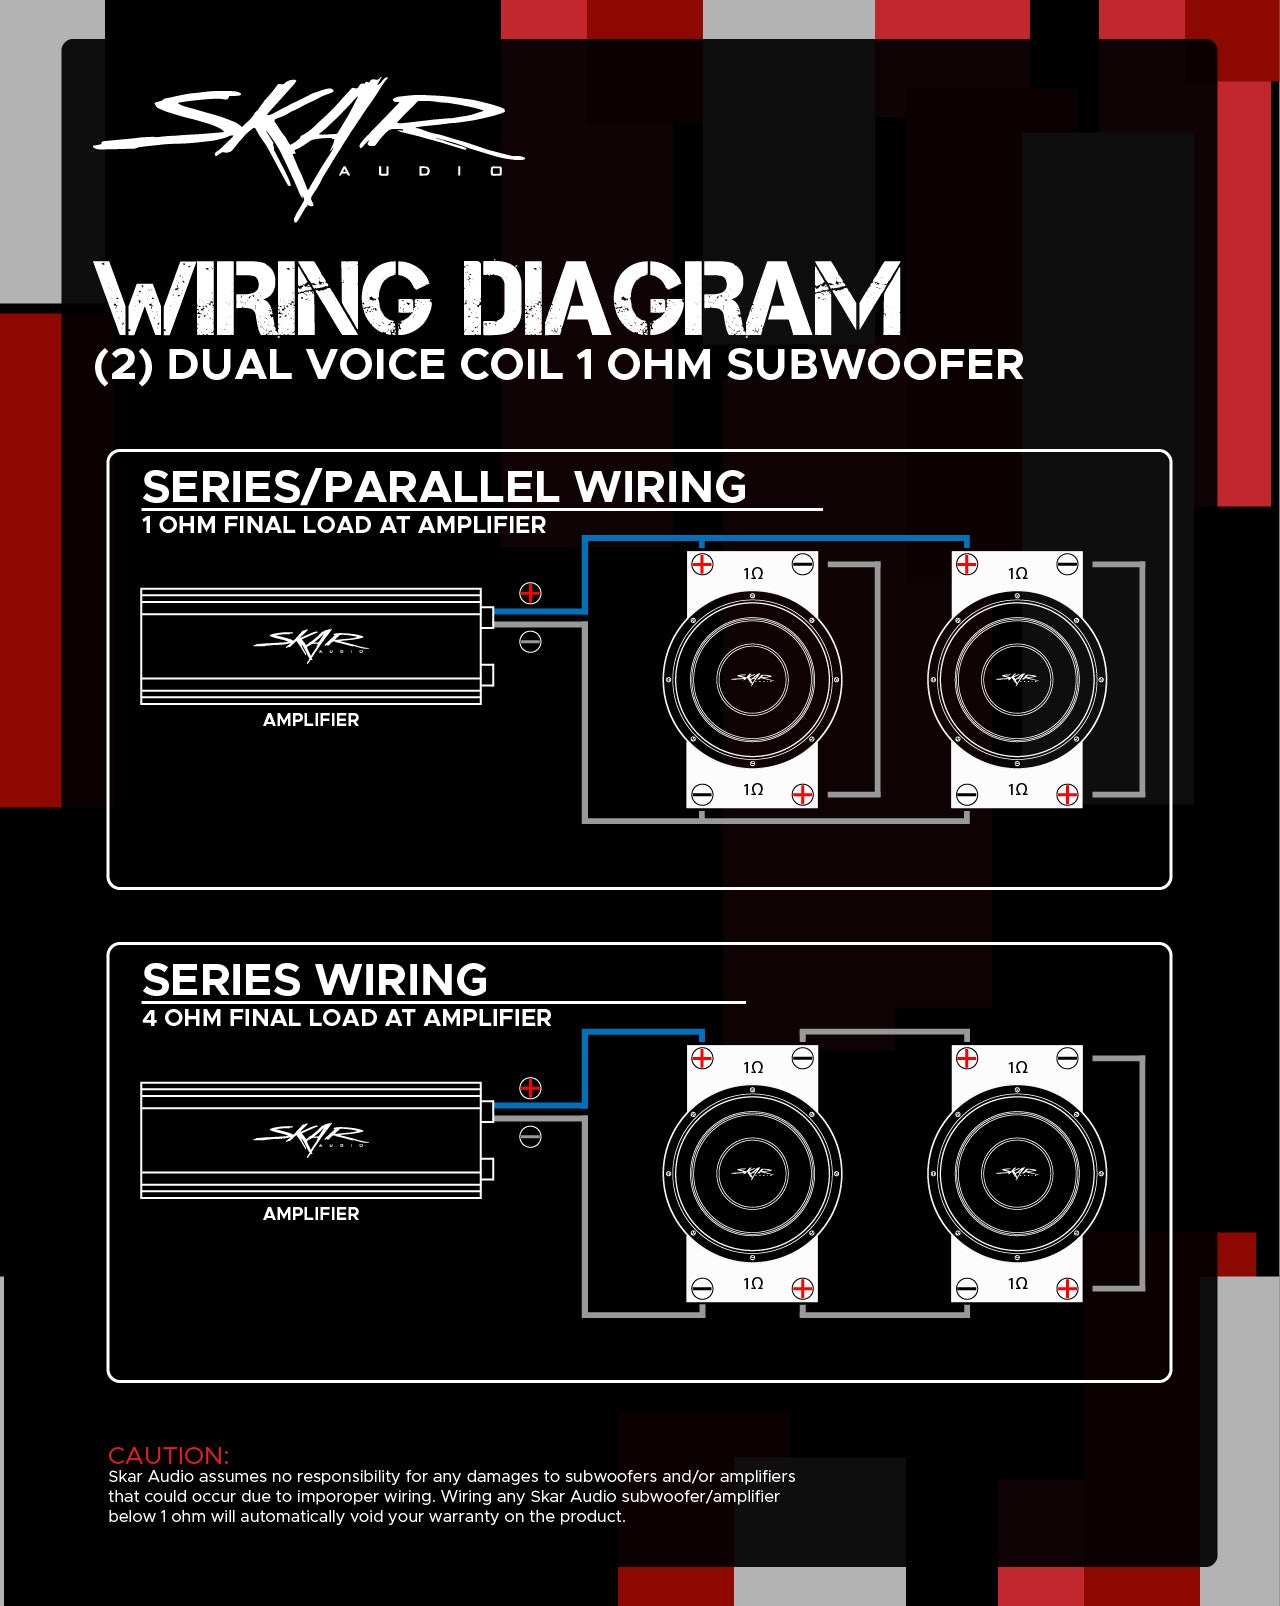 Dual Voice Coil Subwoofer Wiring Guides - Skar Audio Knowledge Base